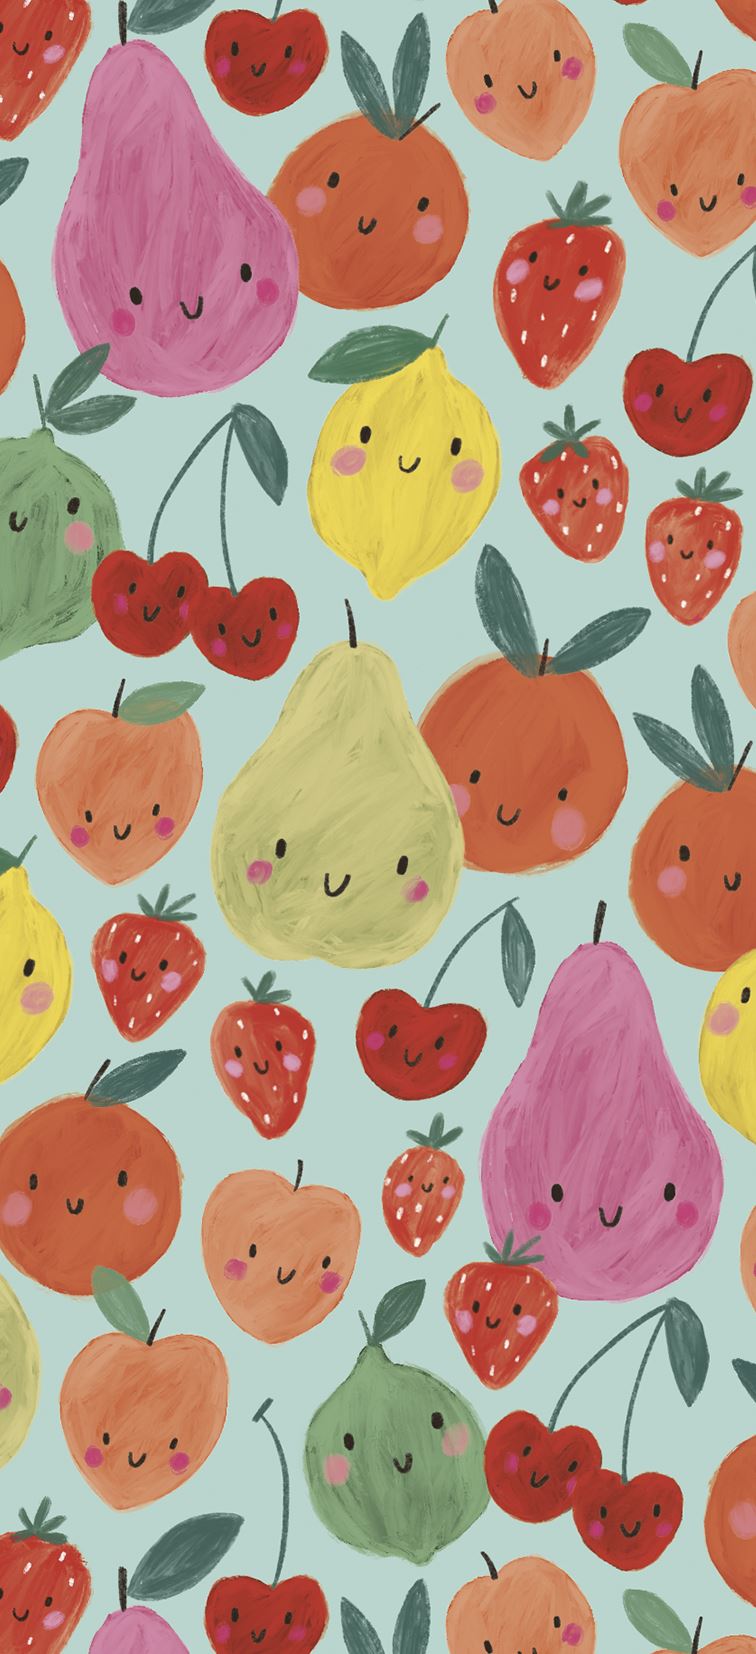 A rectangular sheet of tissue paper with a sage green background covered in fruit with happy smiling faces. The artwork is painted in a kawaii style. The fruit shown are pears, strawberries, cherries, peaches, oranges and lemons.